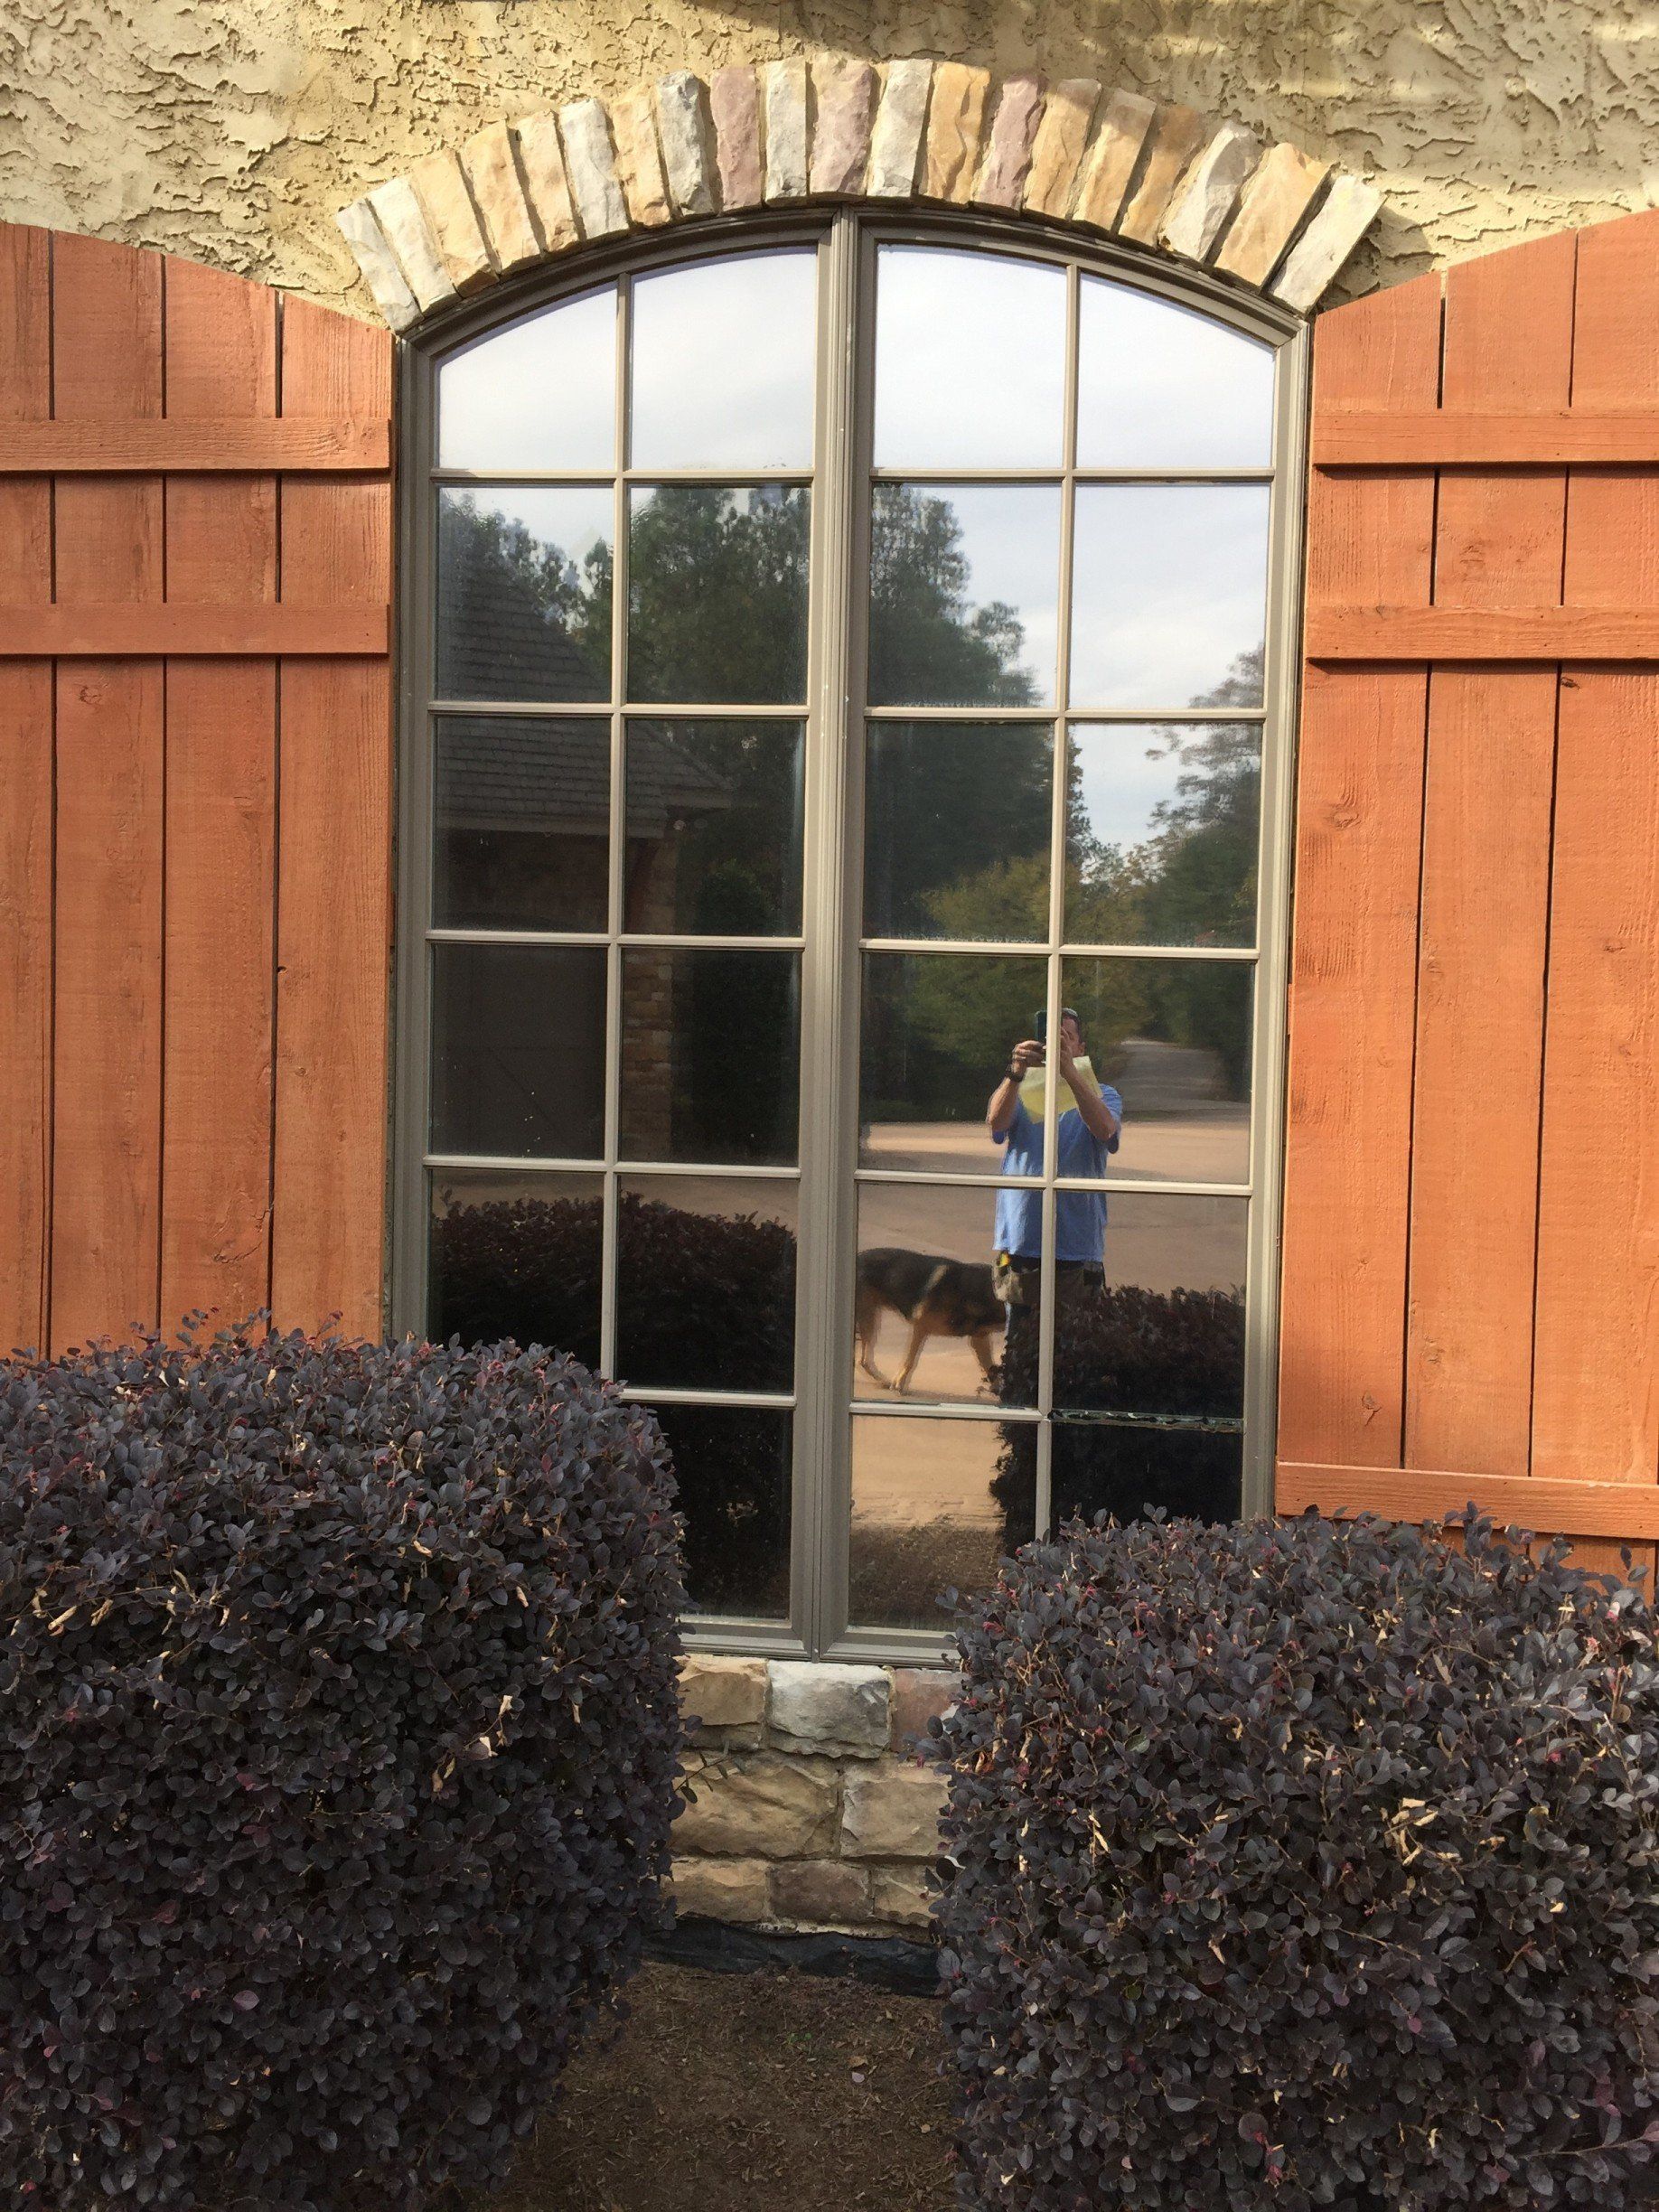 Residential Tint - Home Tint Installation of glass doors and windows in Prattville, AL -2017